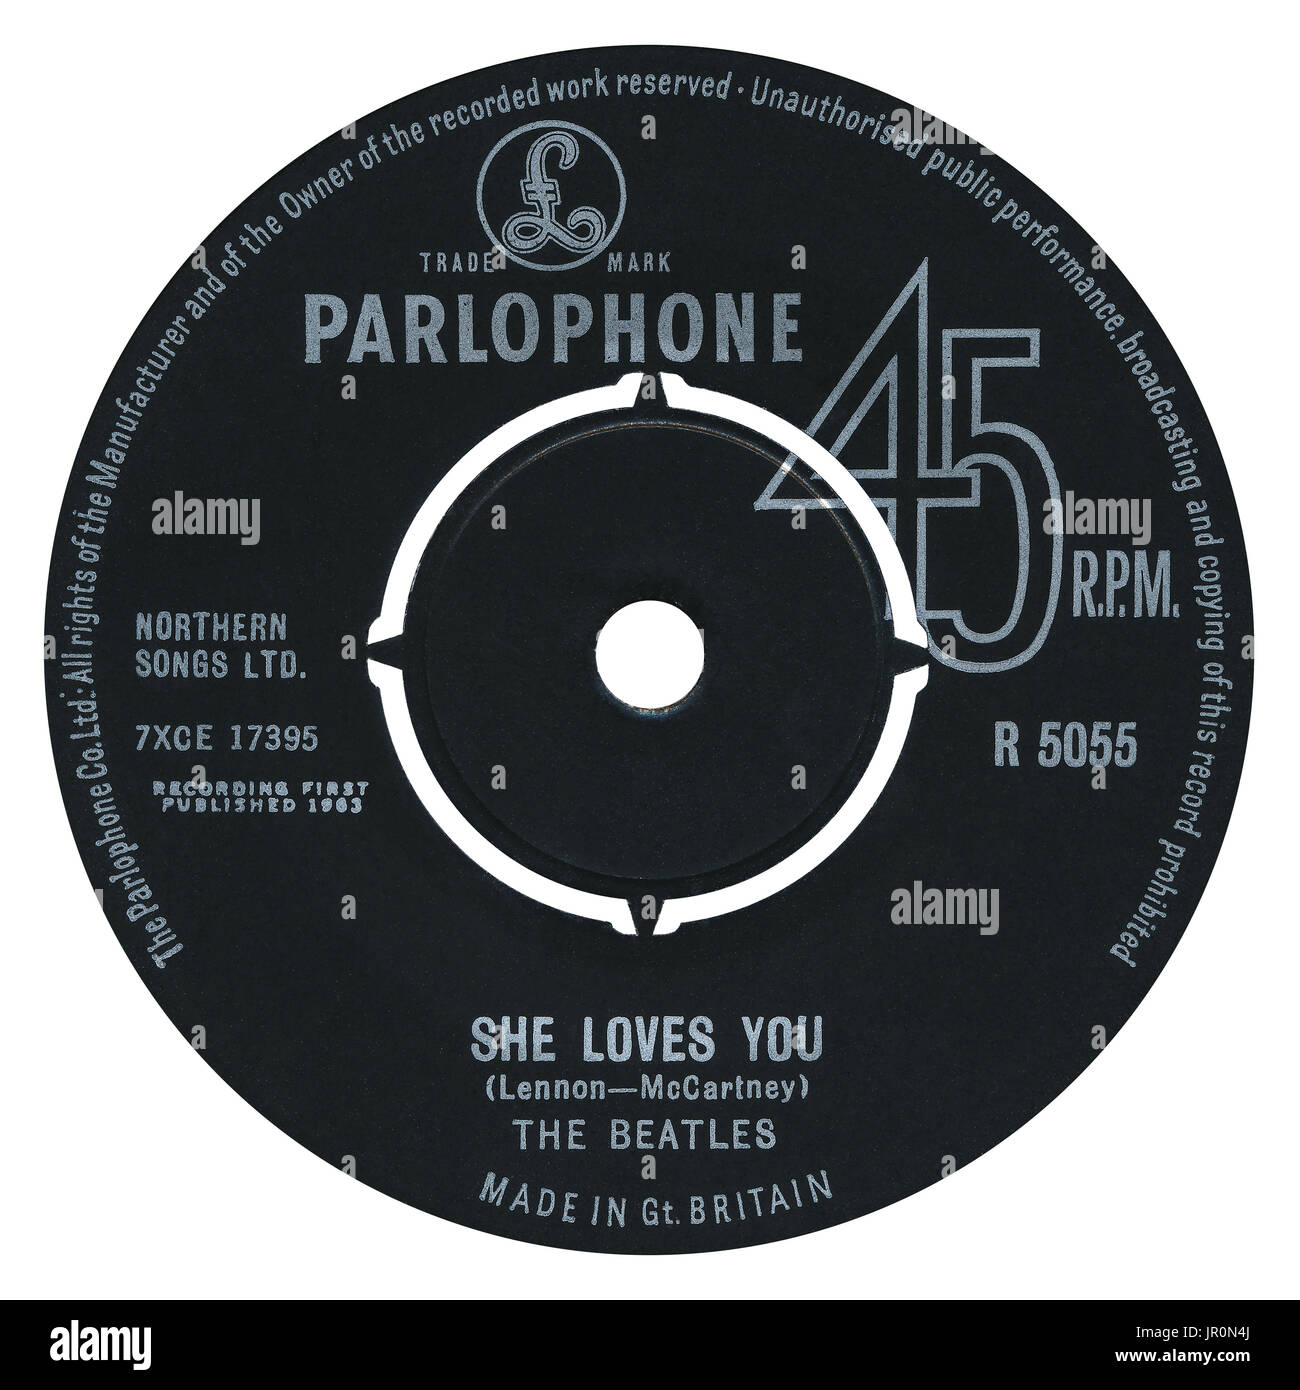 45 RPM 7' UK record label of She Loves You by The Beatles on the Parlophone label from 1963. Stock Photo